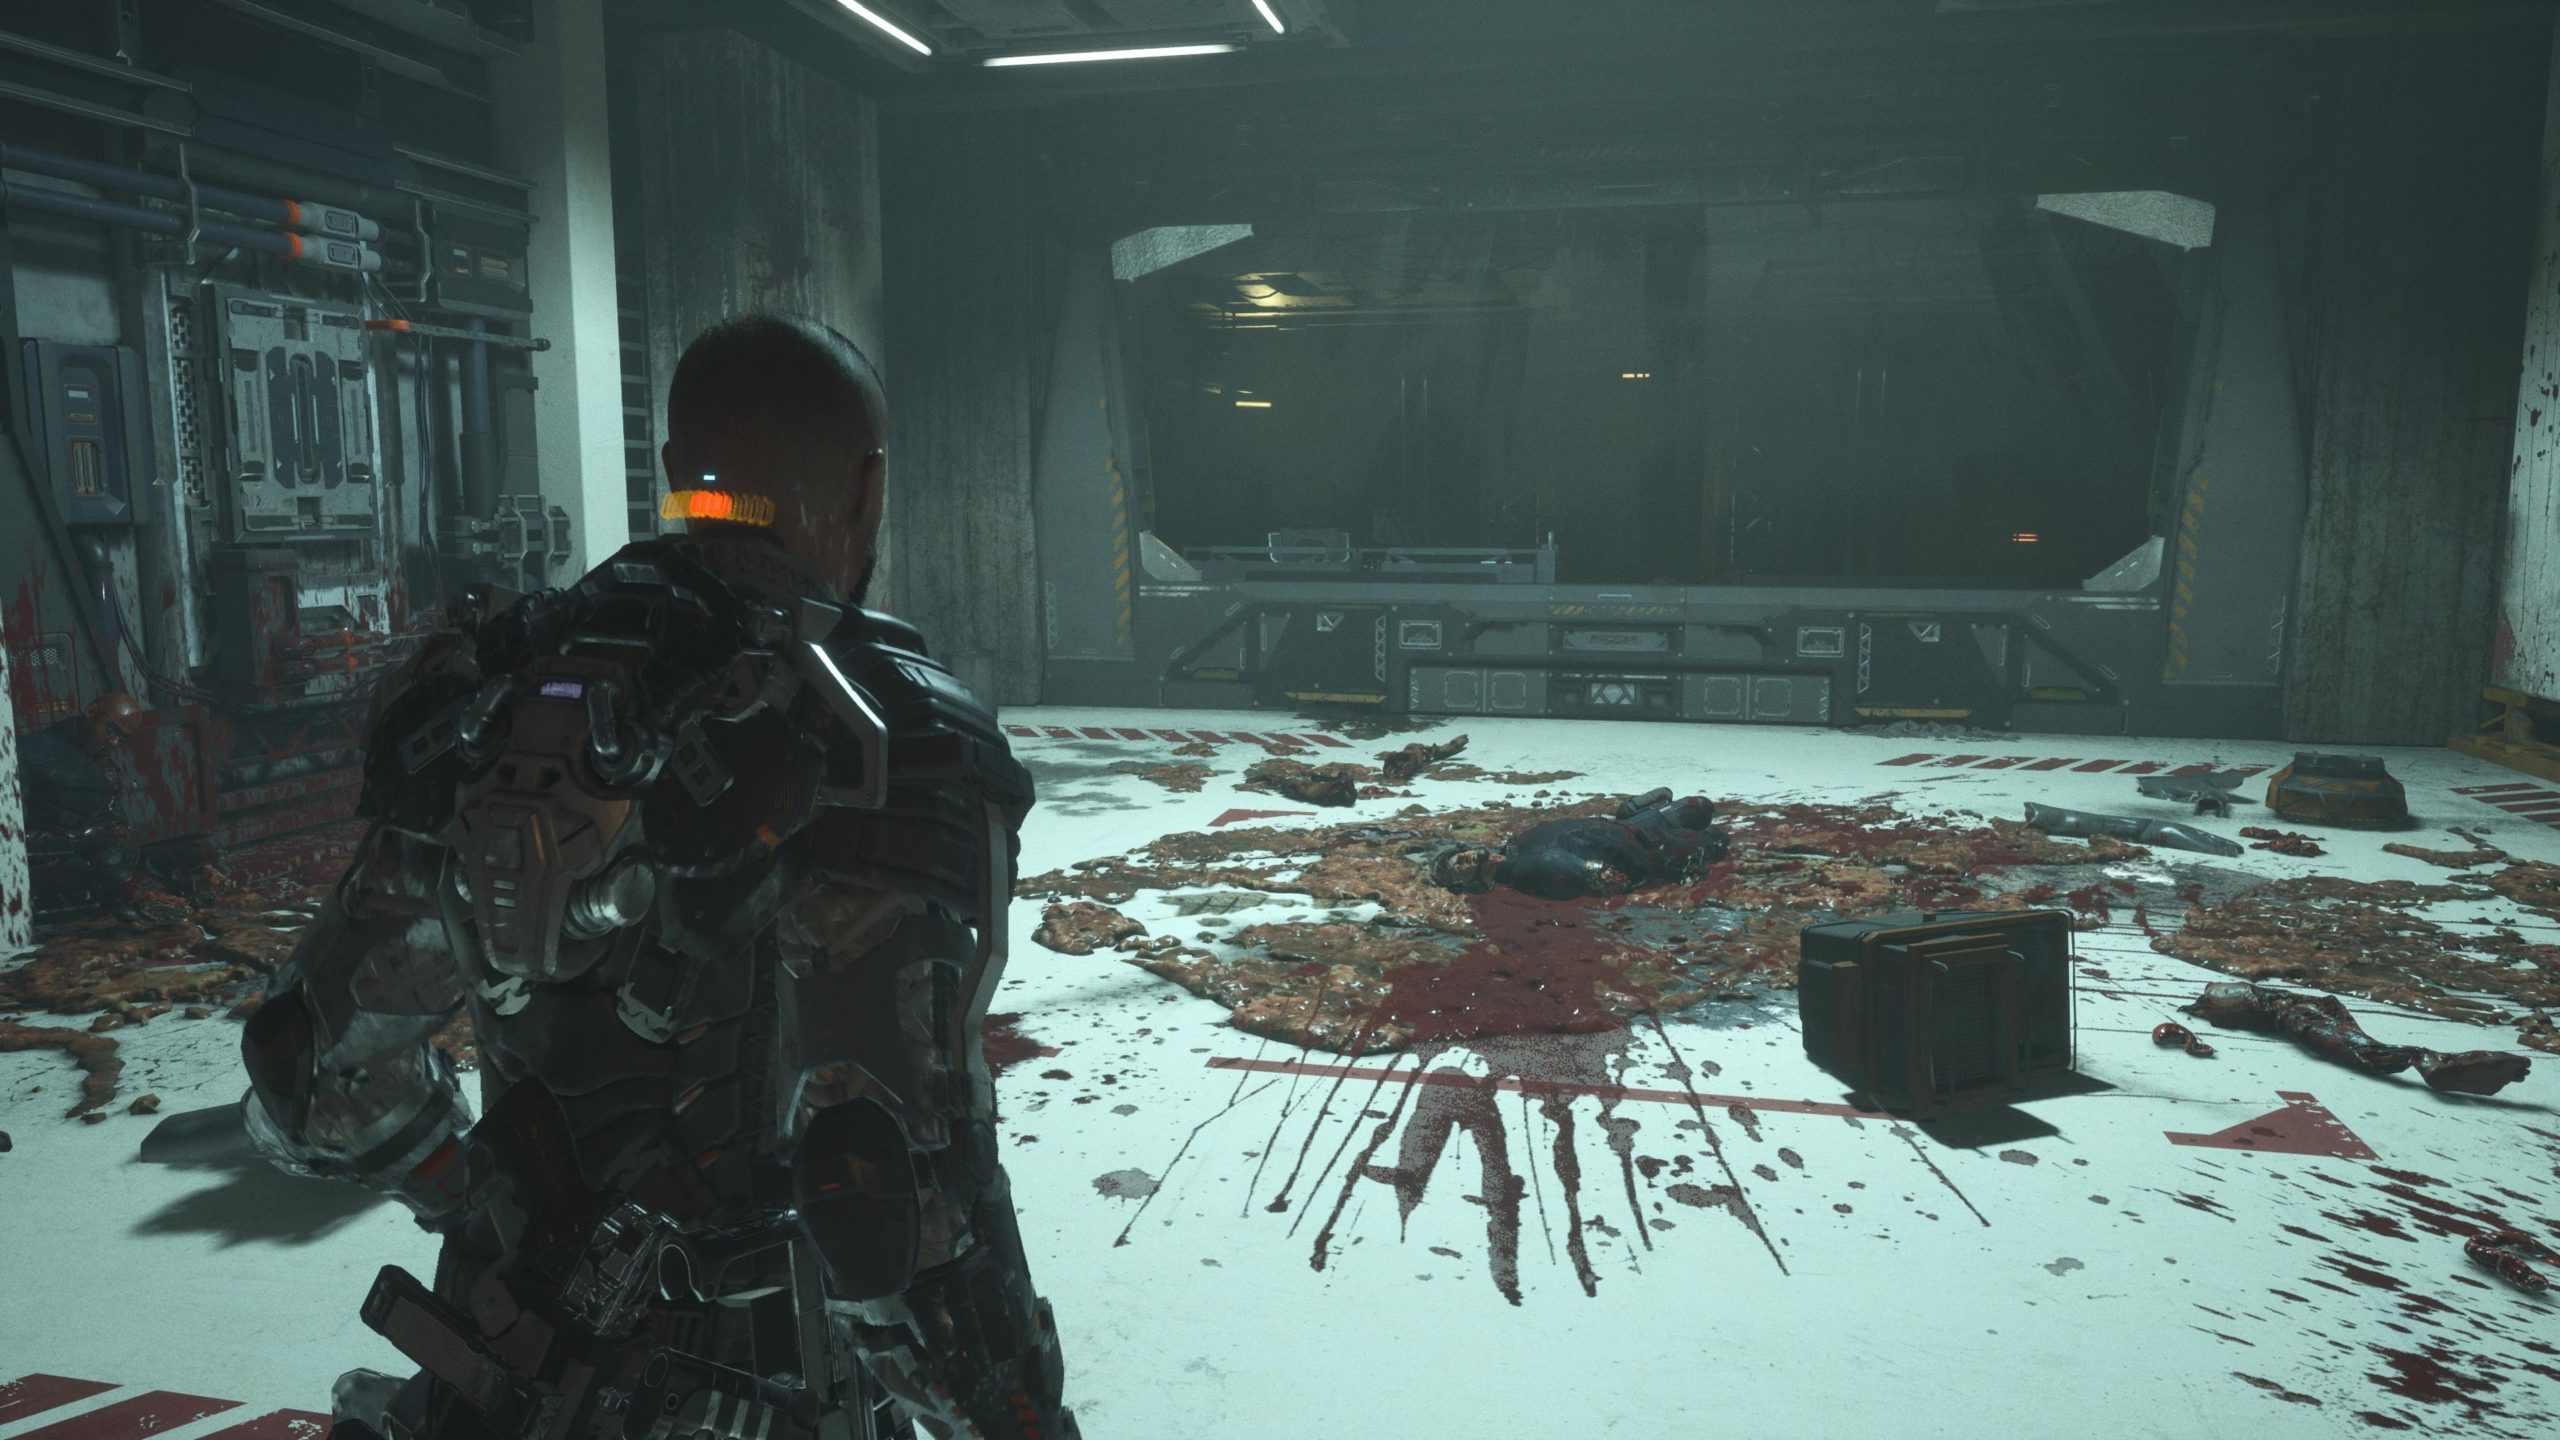 Gore in The Final Transmission